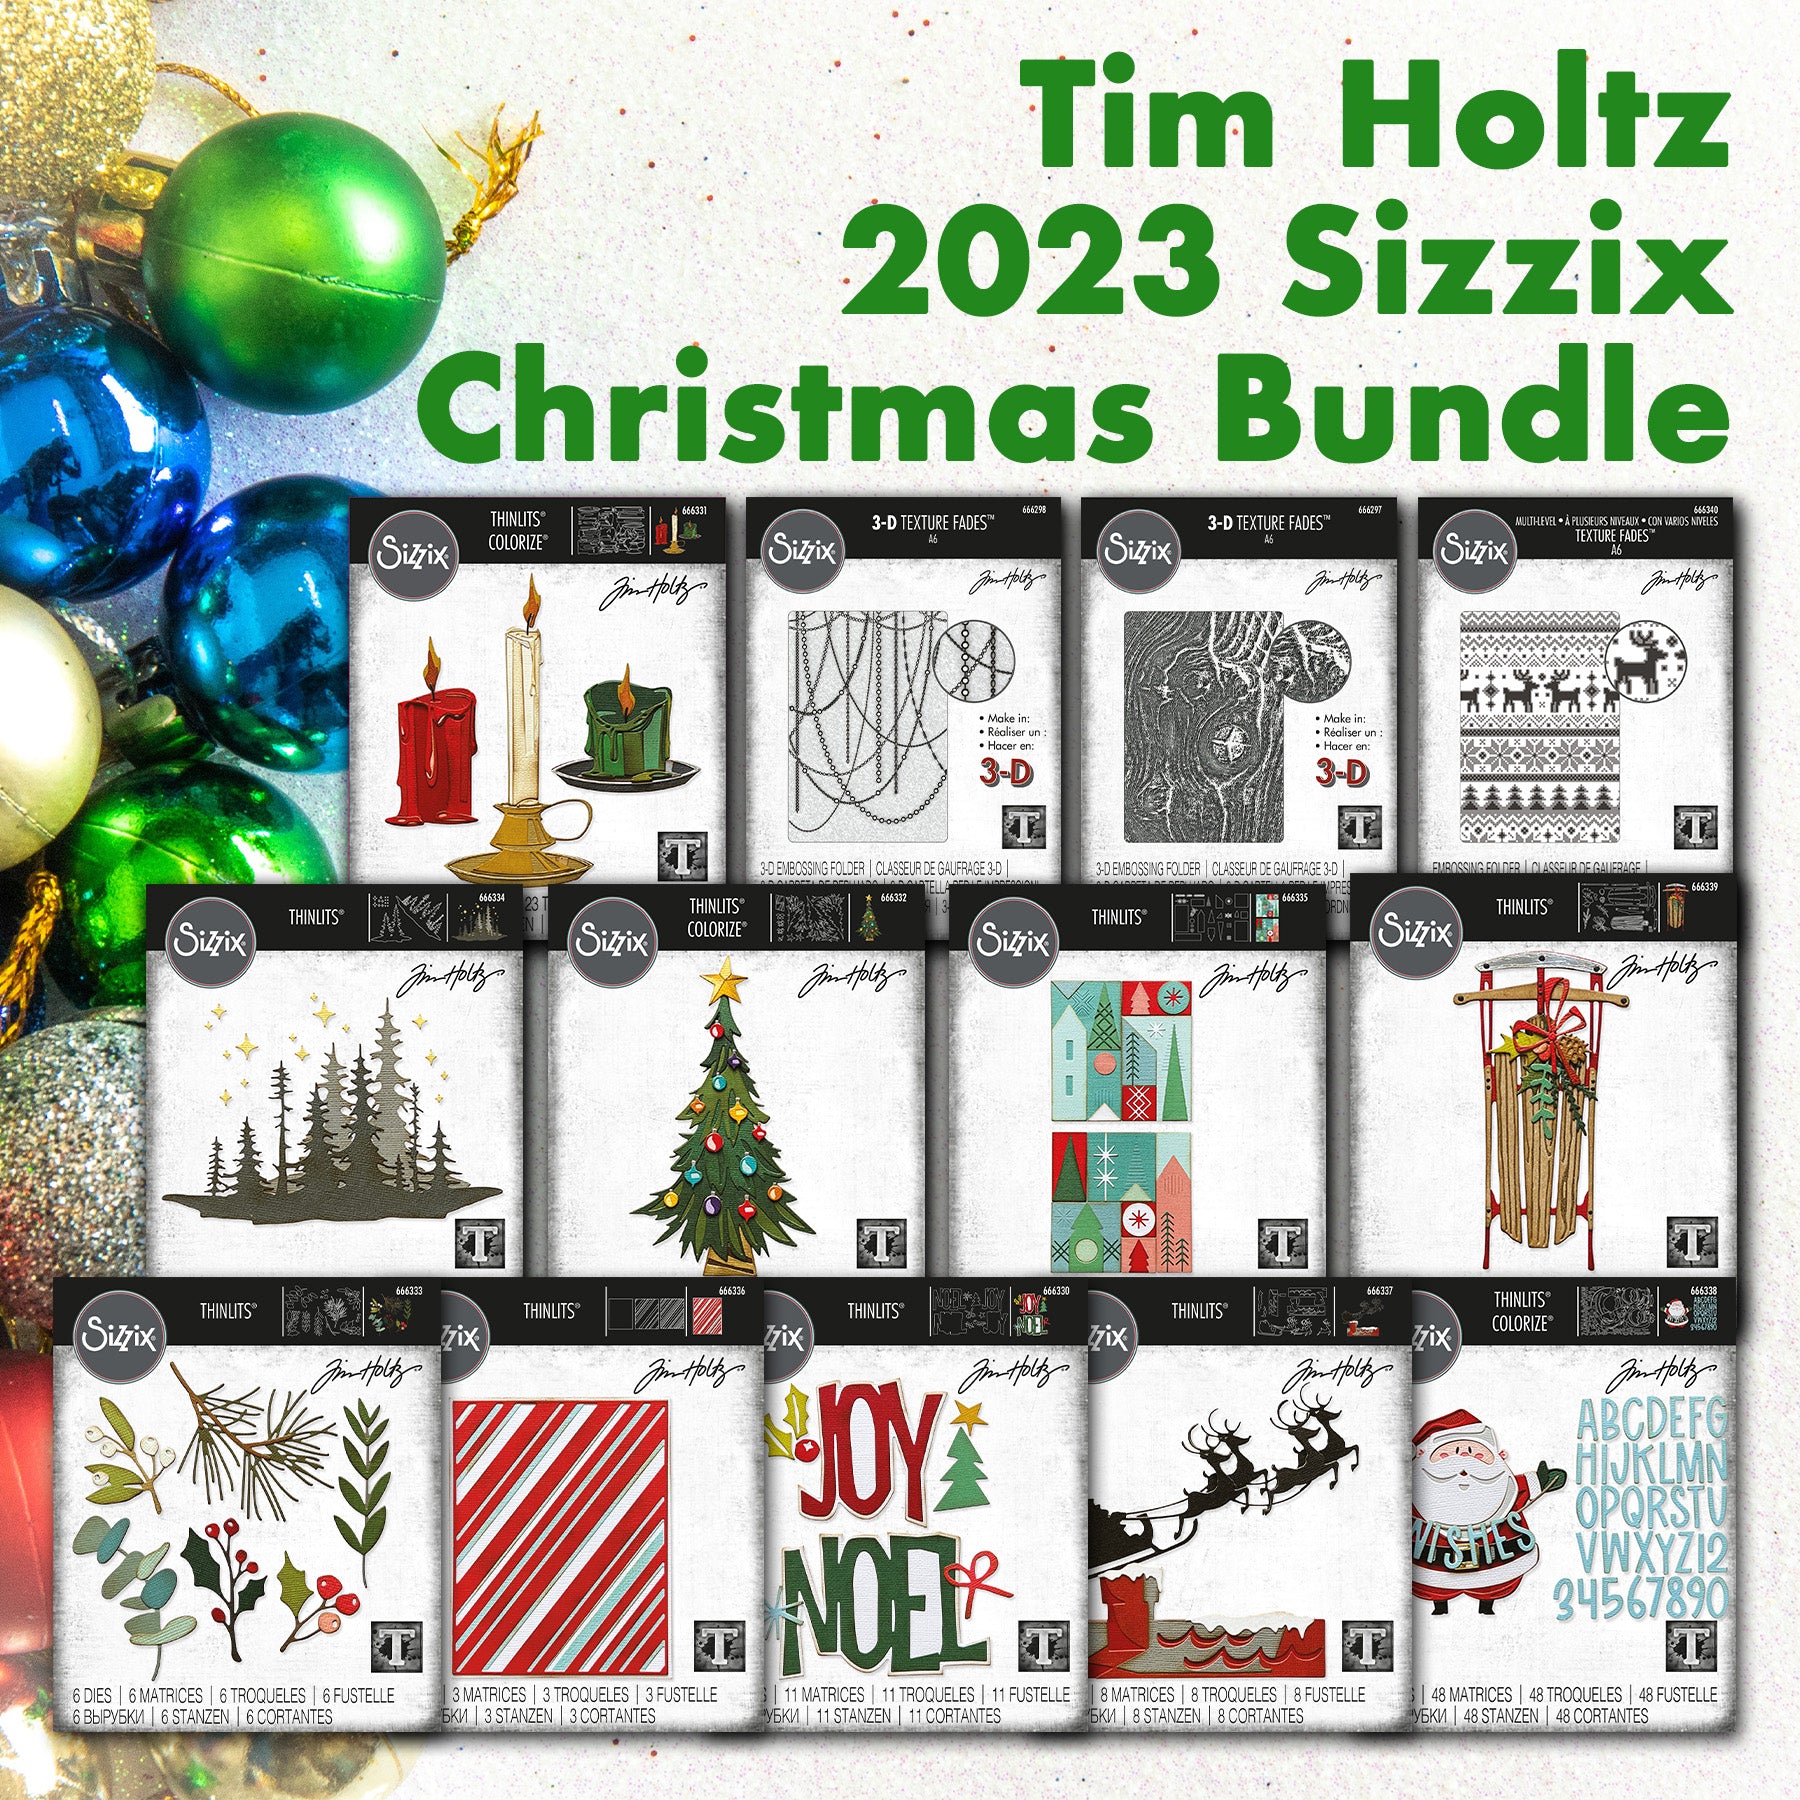 Tim Holtz and Sizzix Holiday 2023 Die Release - Who Stole My Glitter?